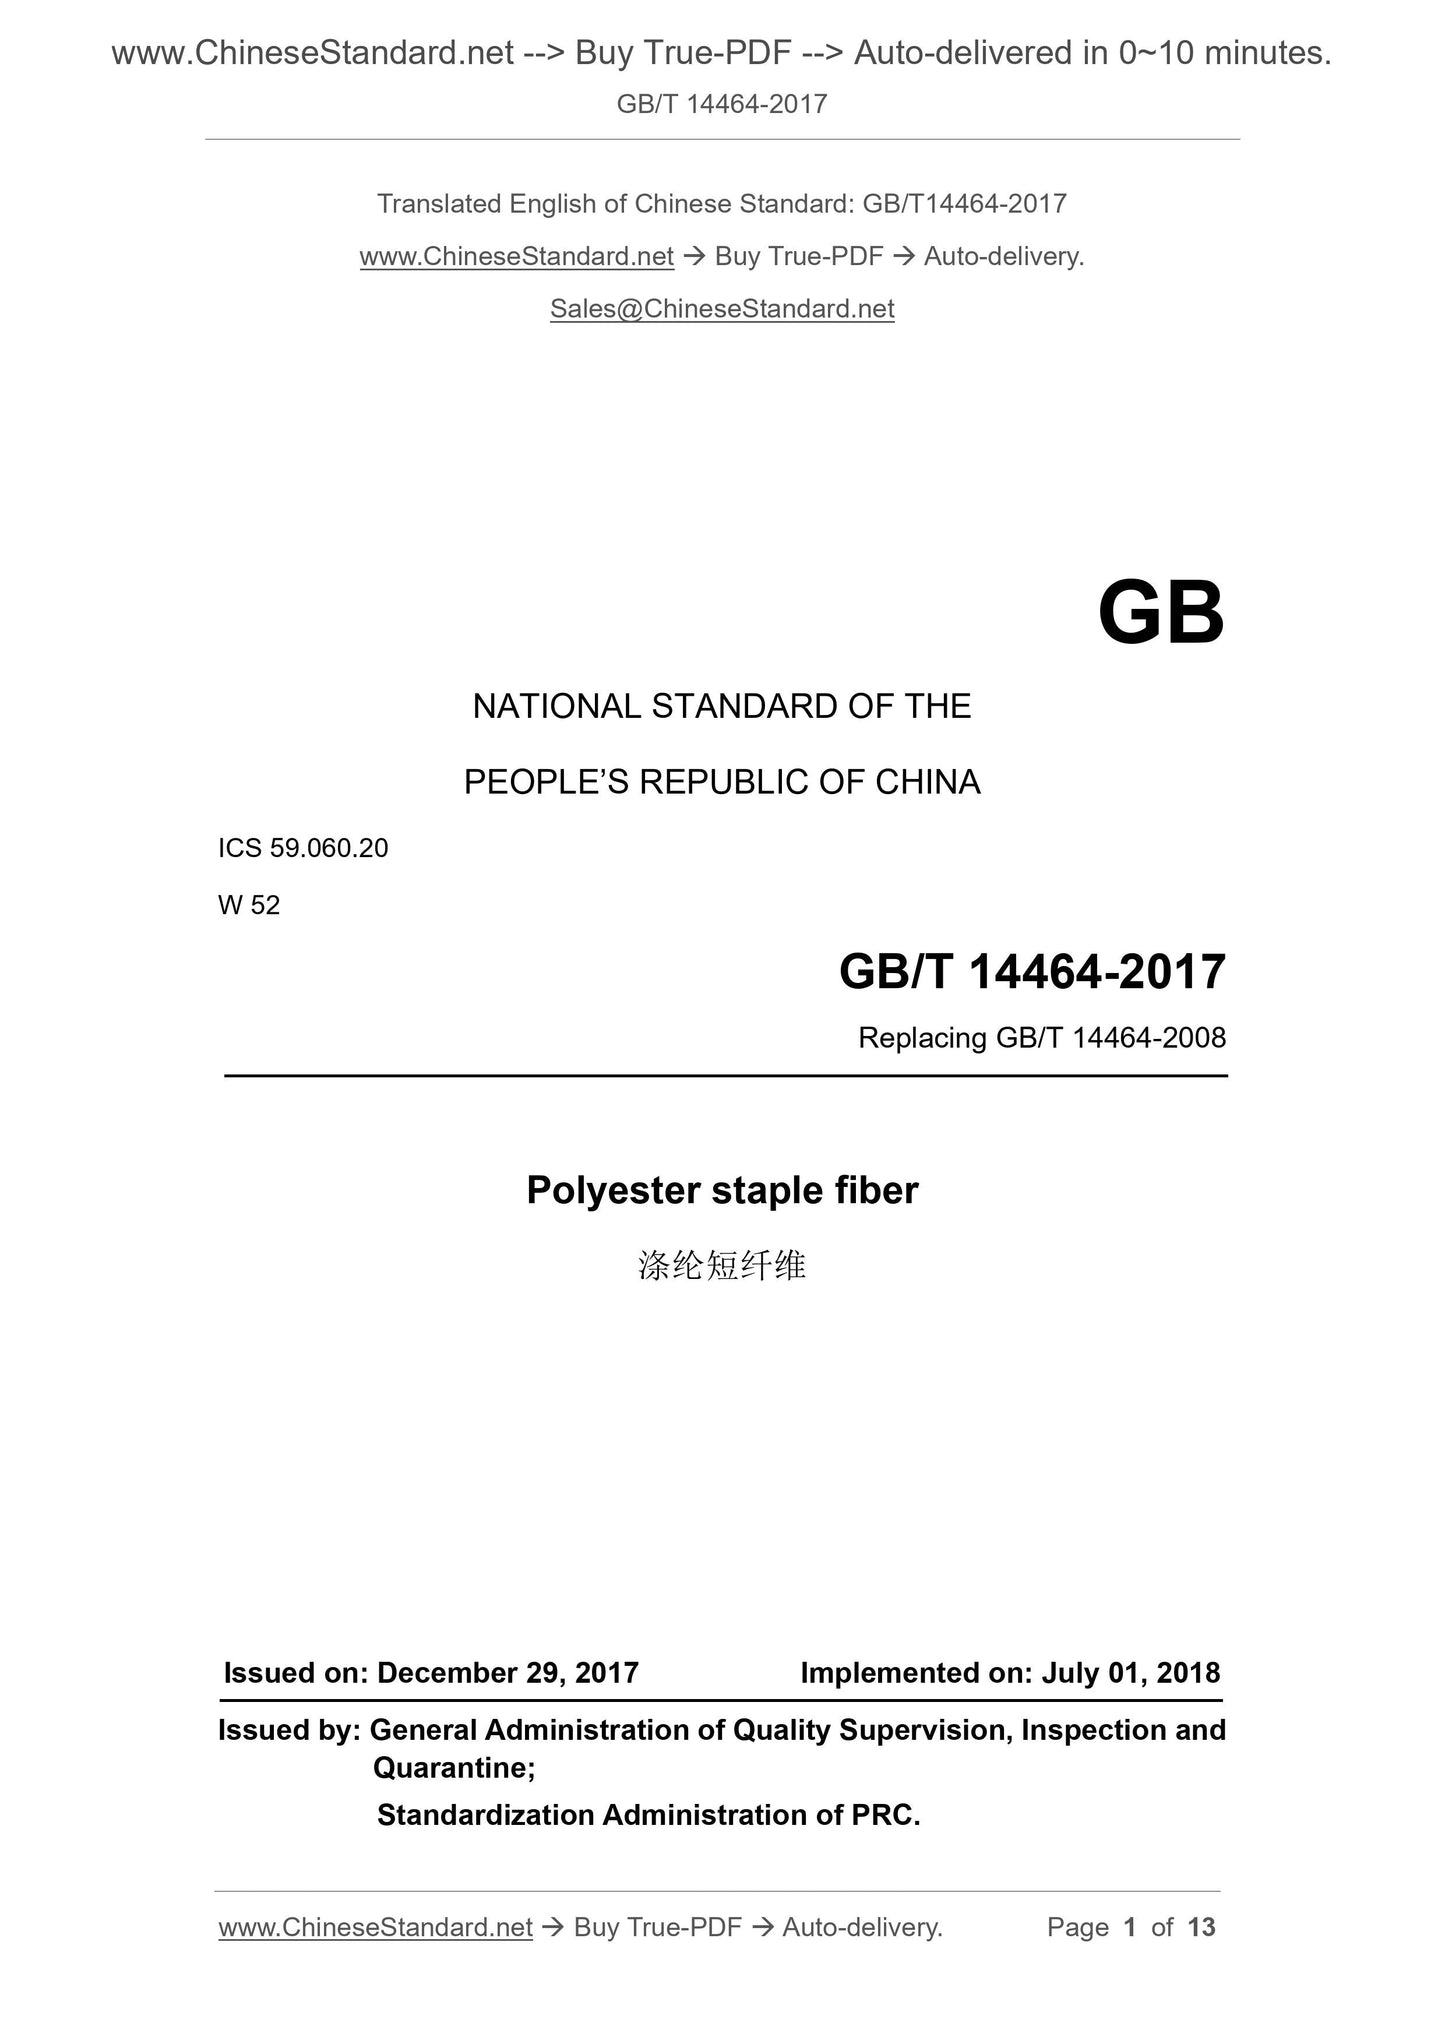 GB/T 14464-2017 Page 1